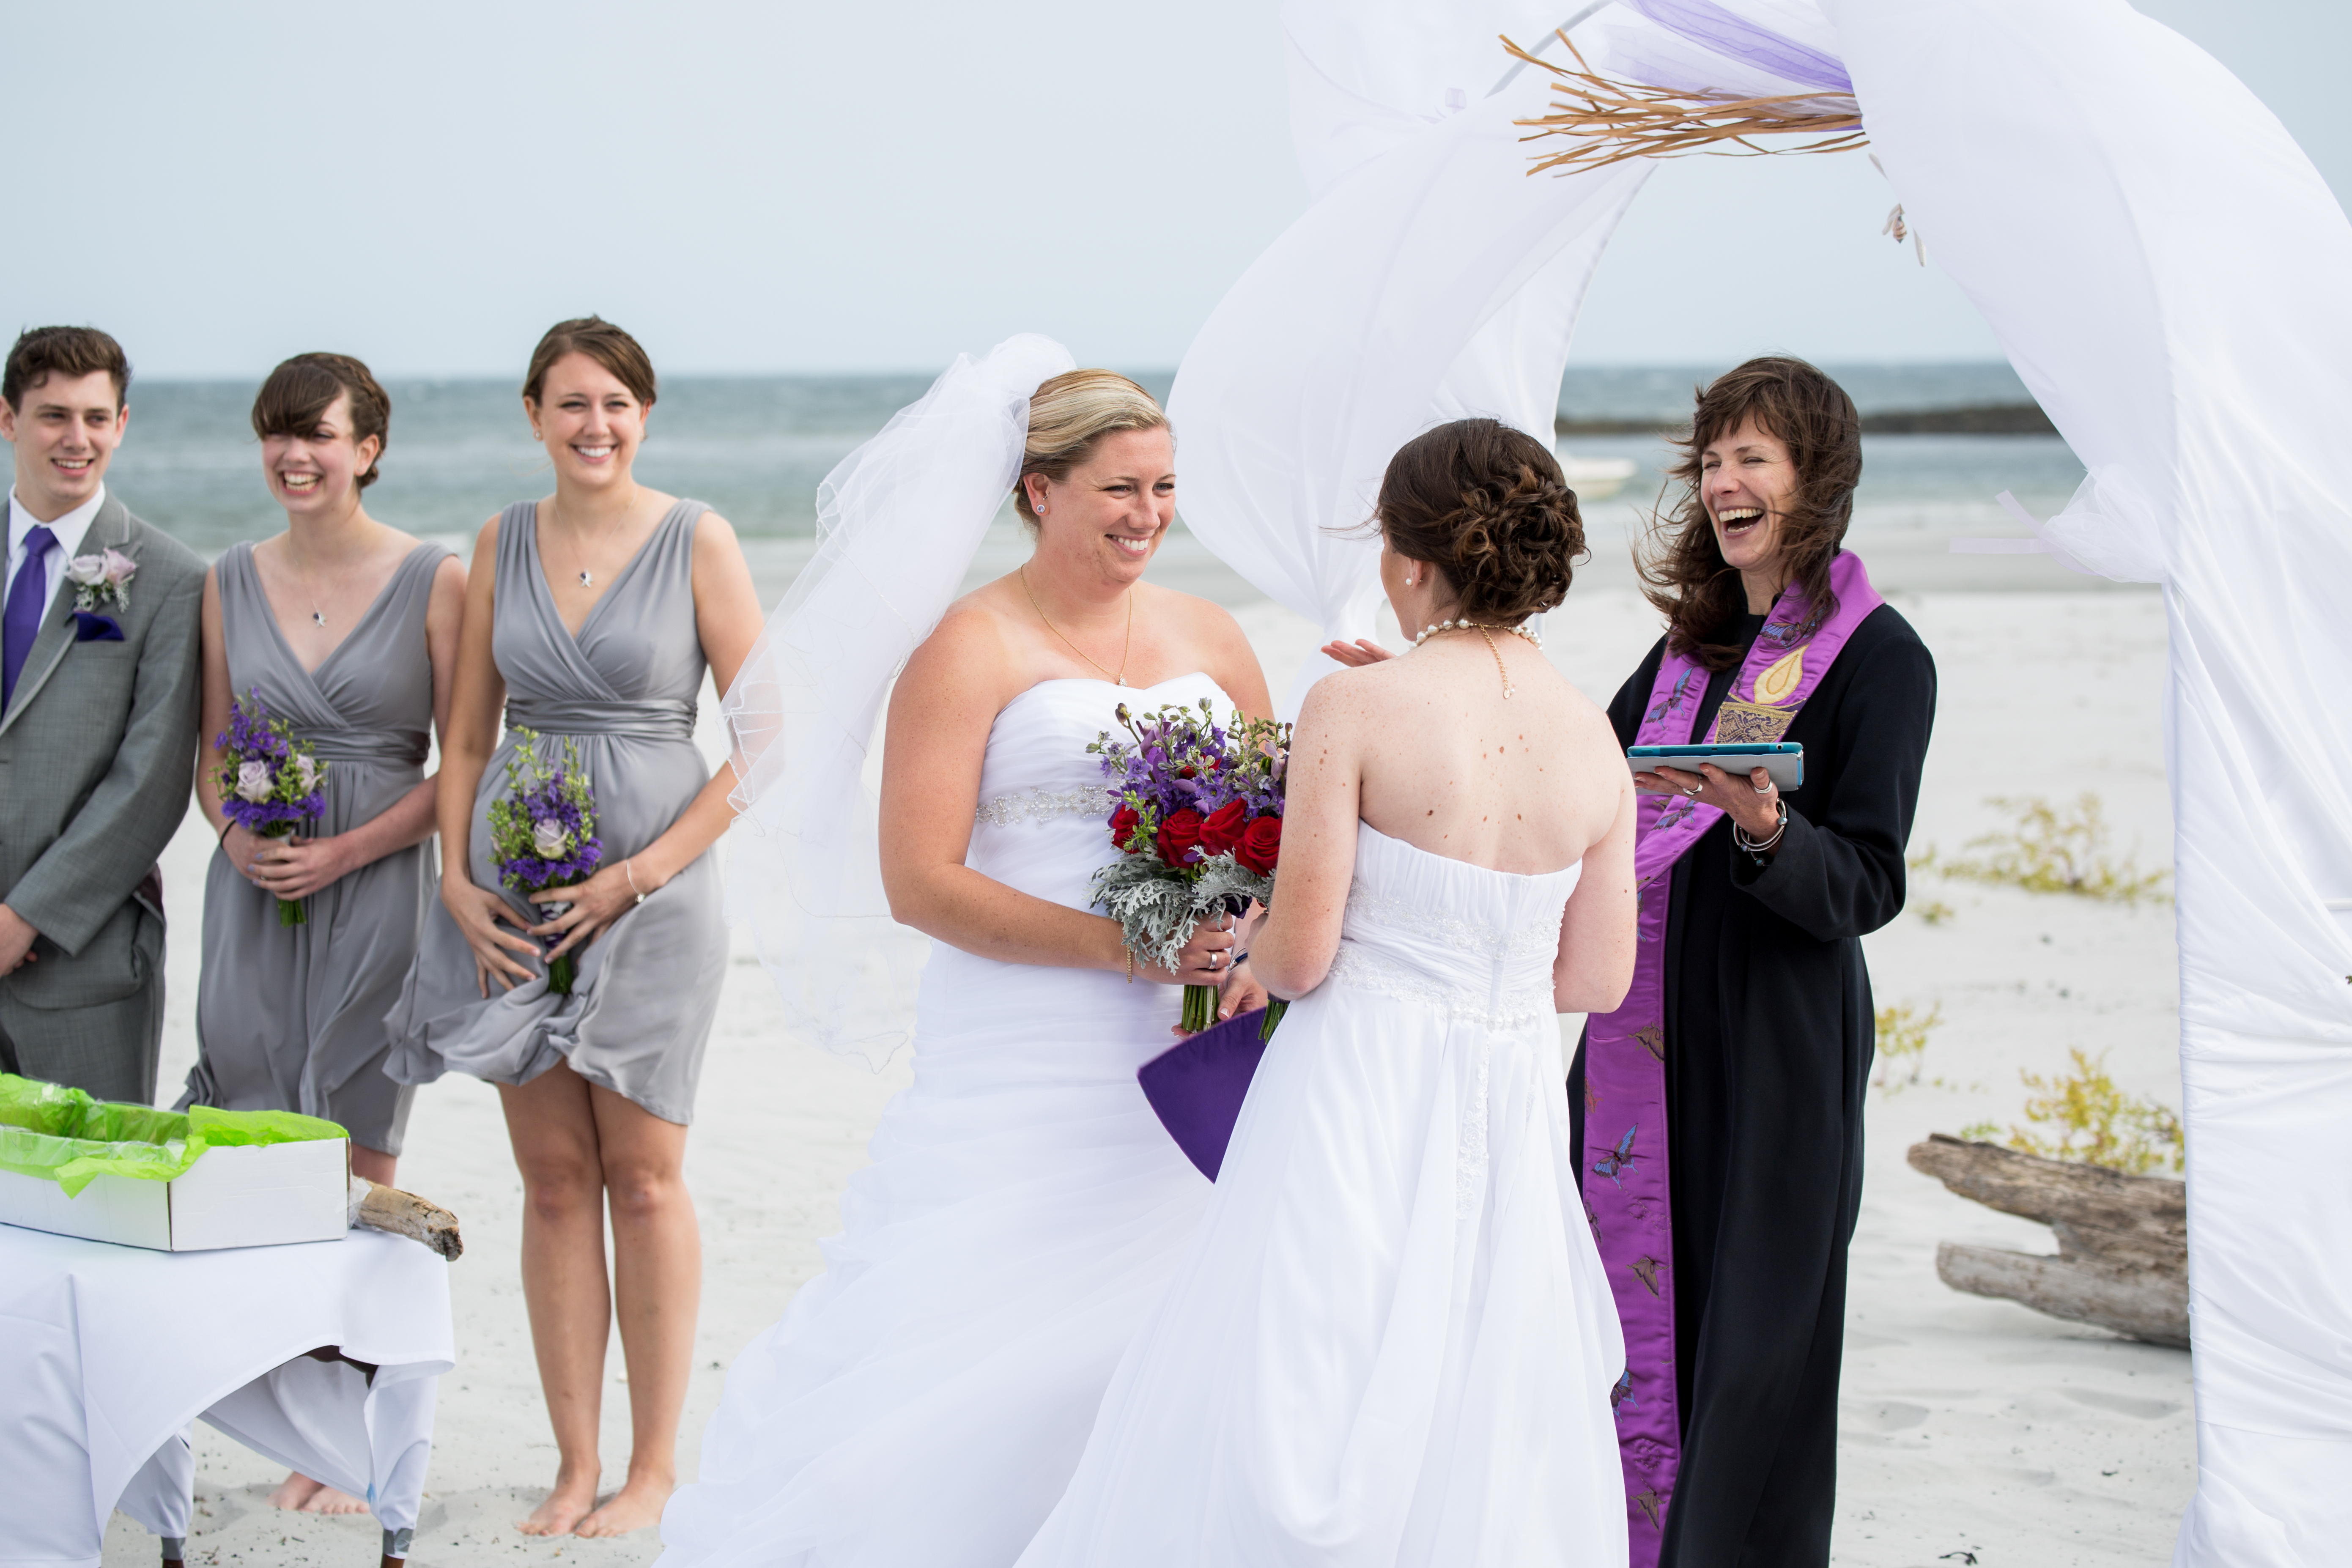 Two women getting married at the beach